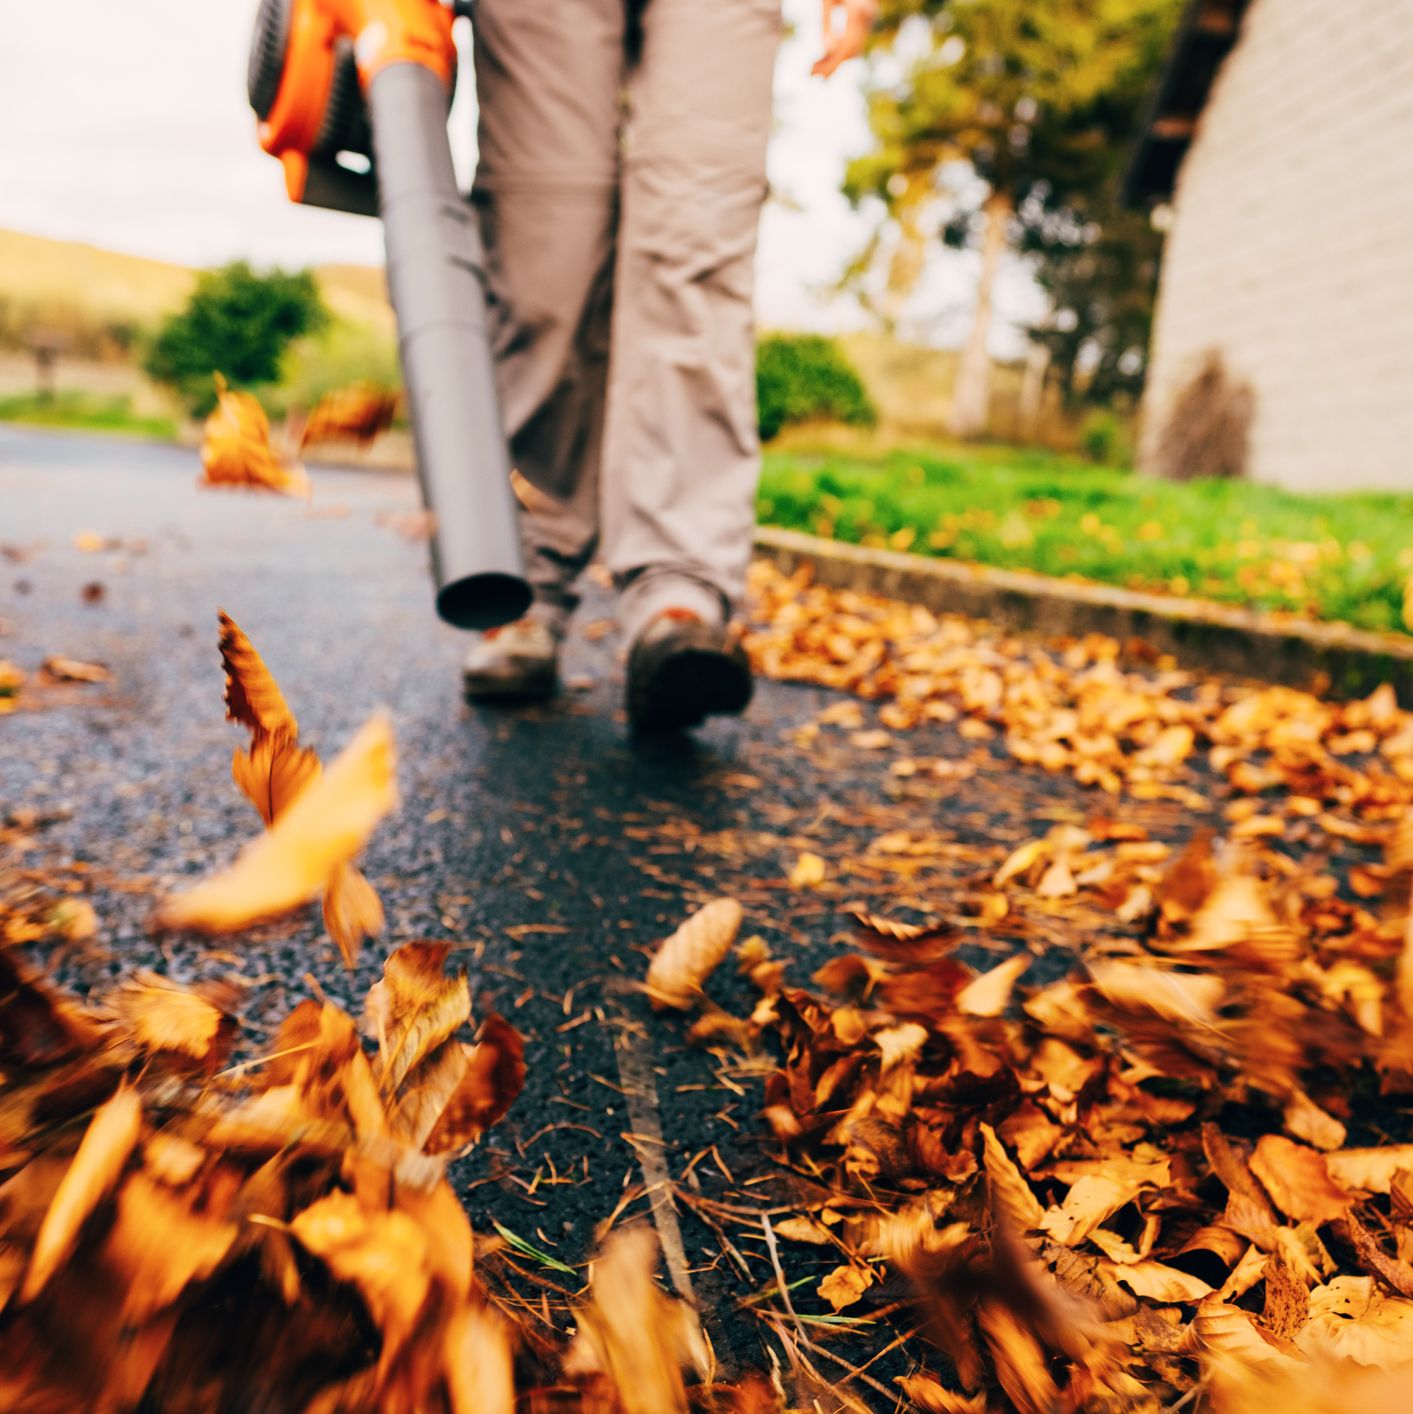 The Case for Not Raking Your Fallen Leaves